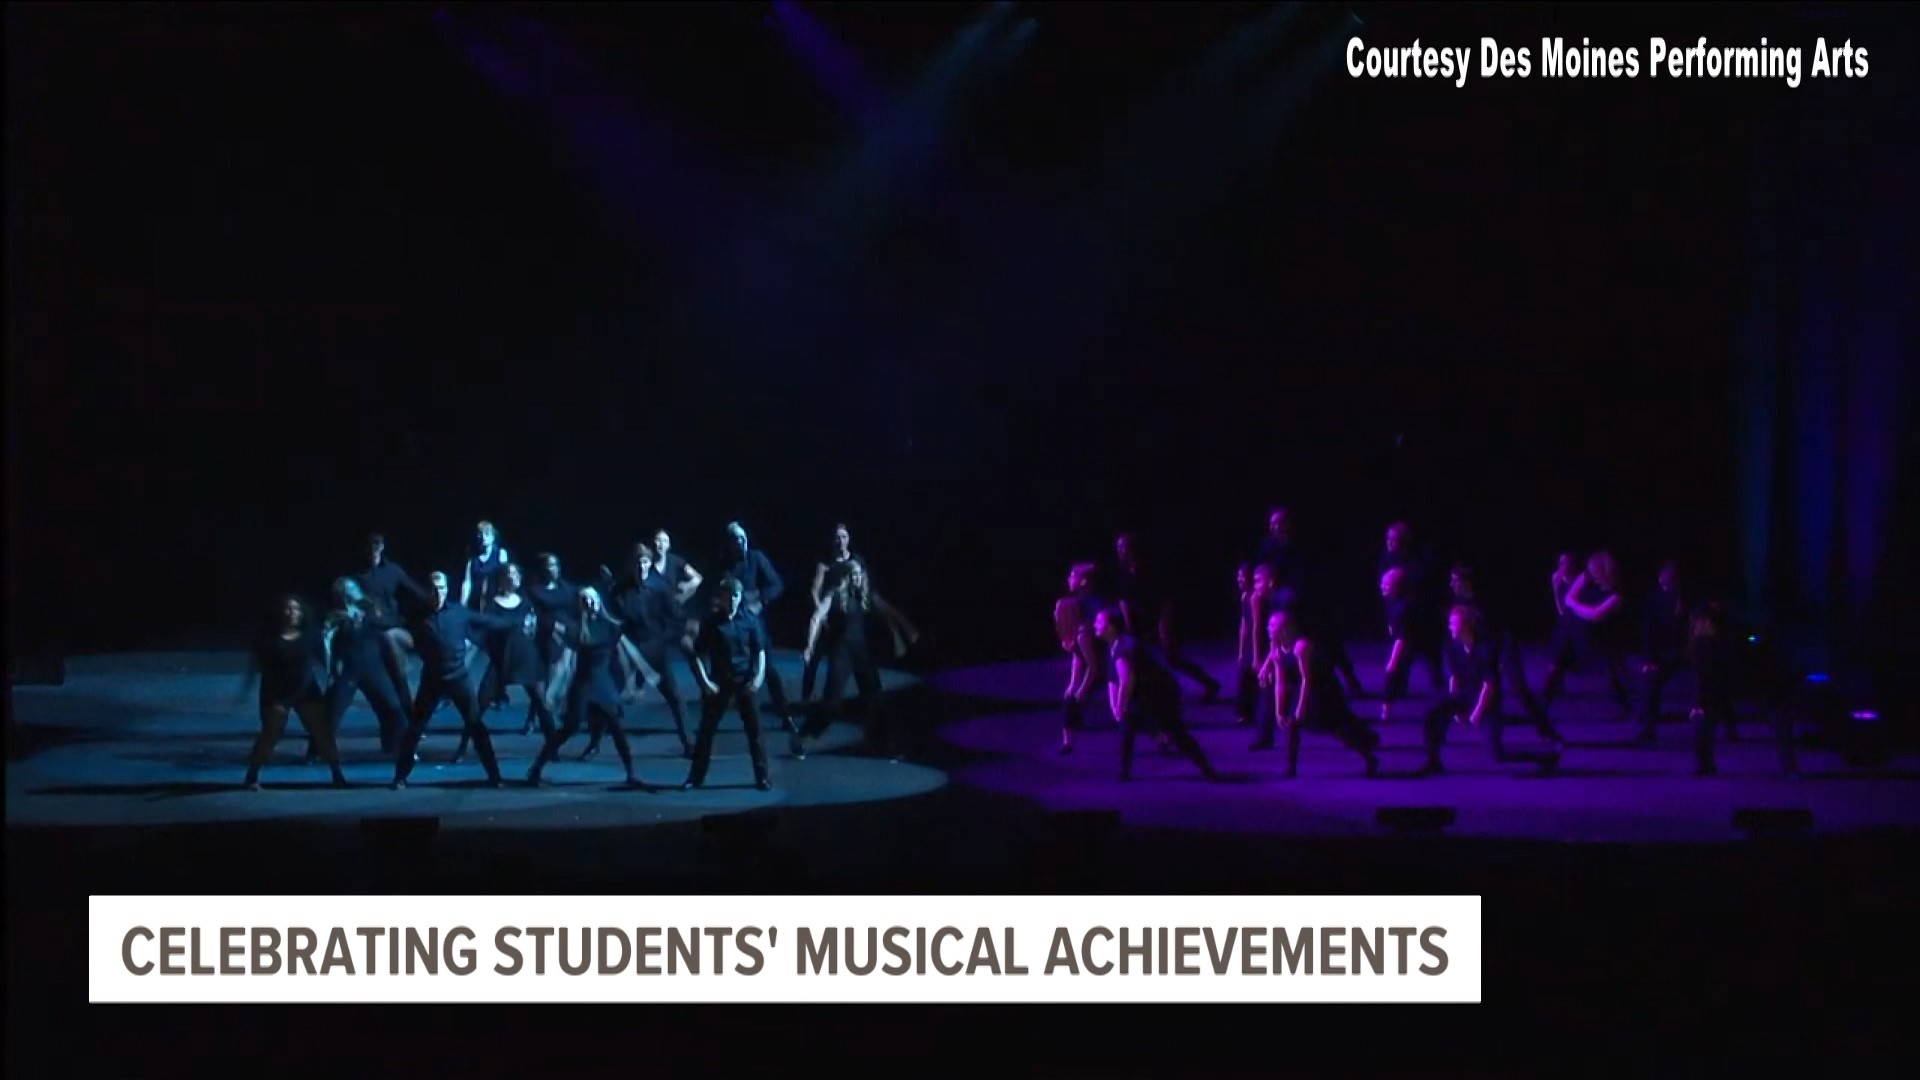 Jonathan Brendemuehl with Des Moines Performing Arts previews the 2022 Iowa High School Musical Theater Awards Showcase.